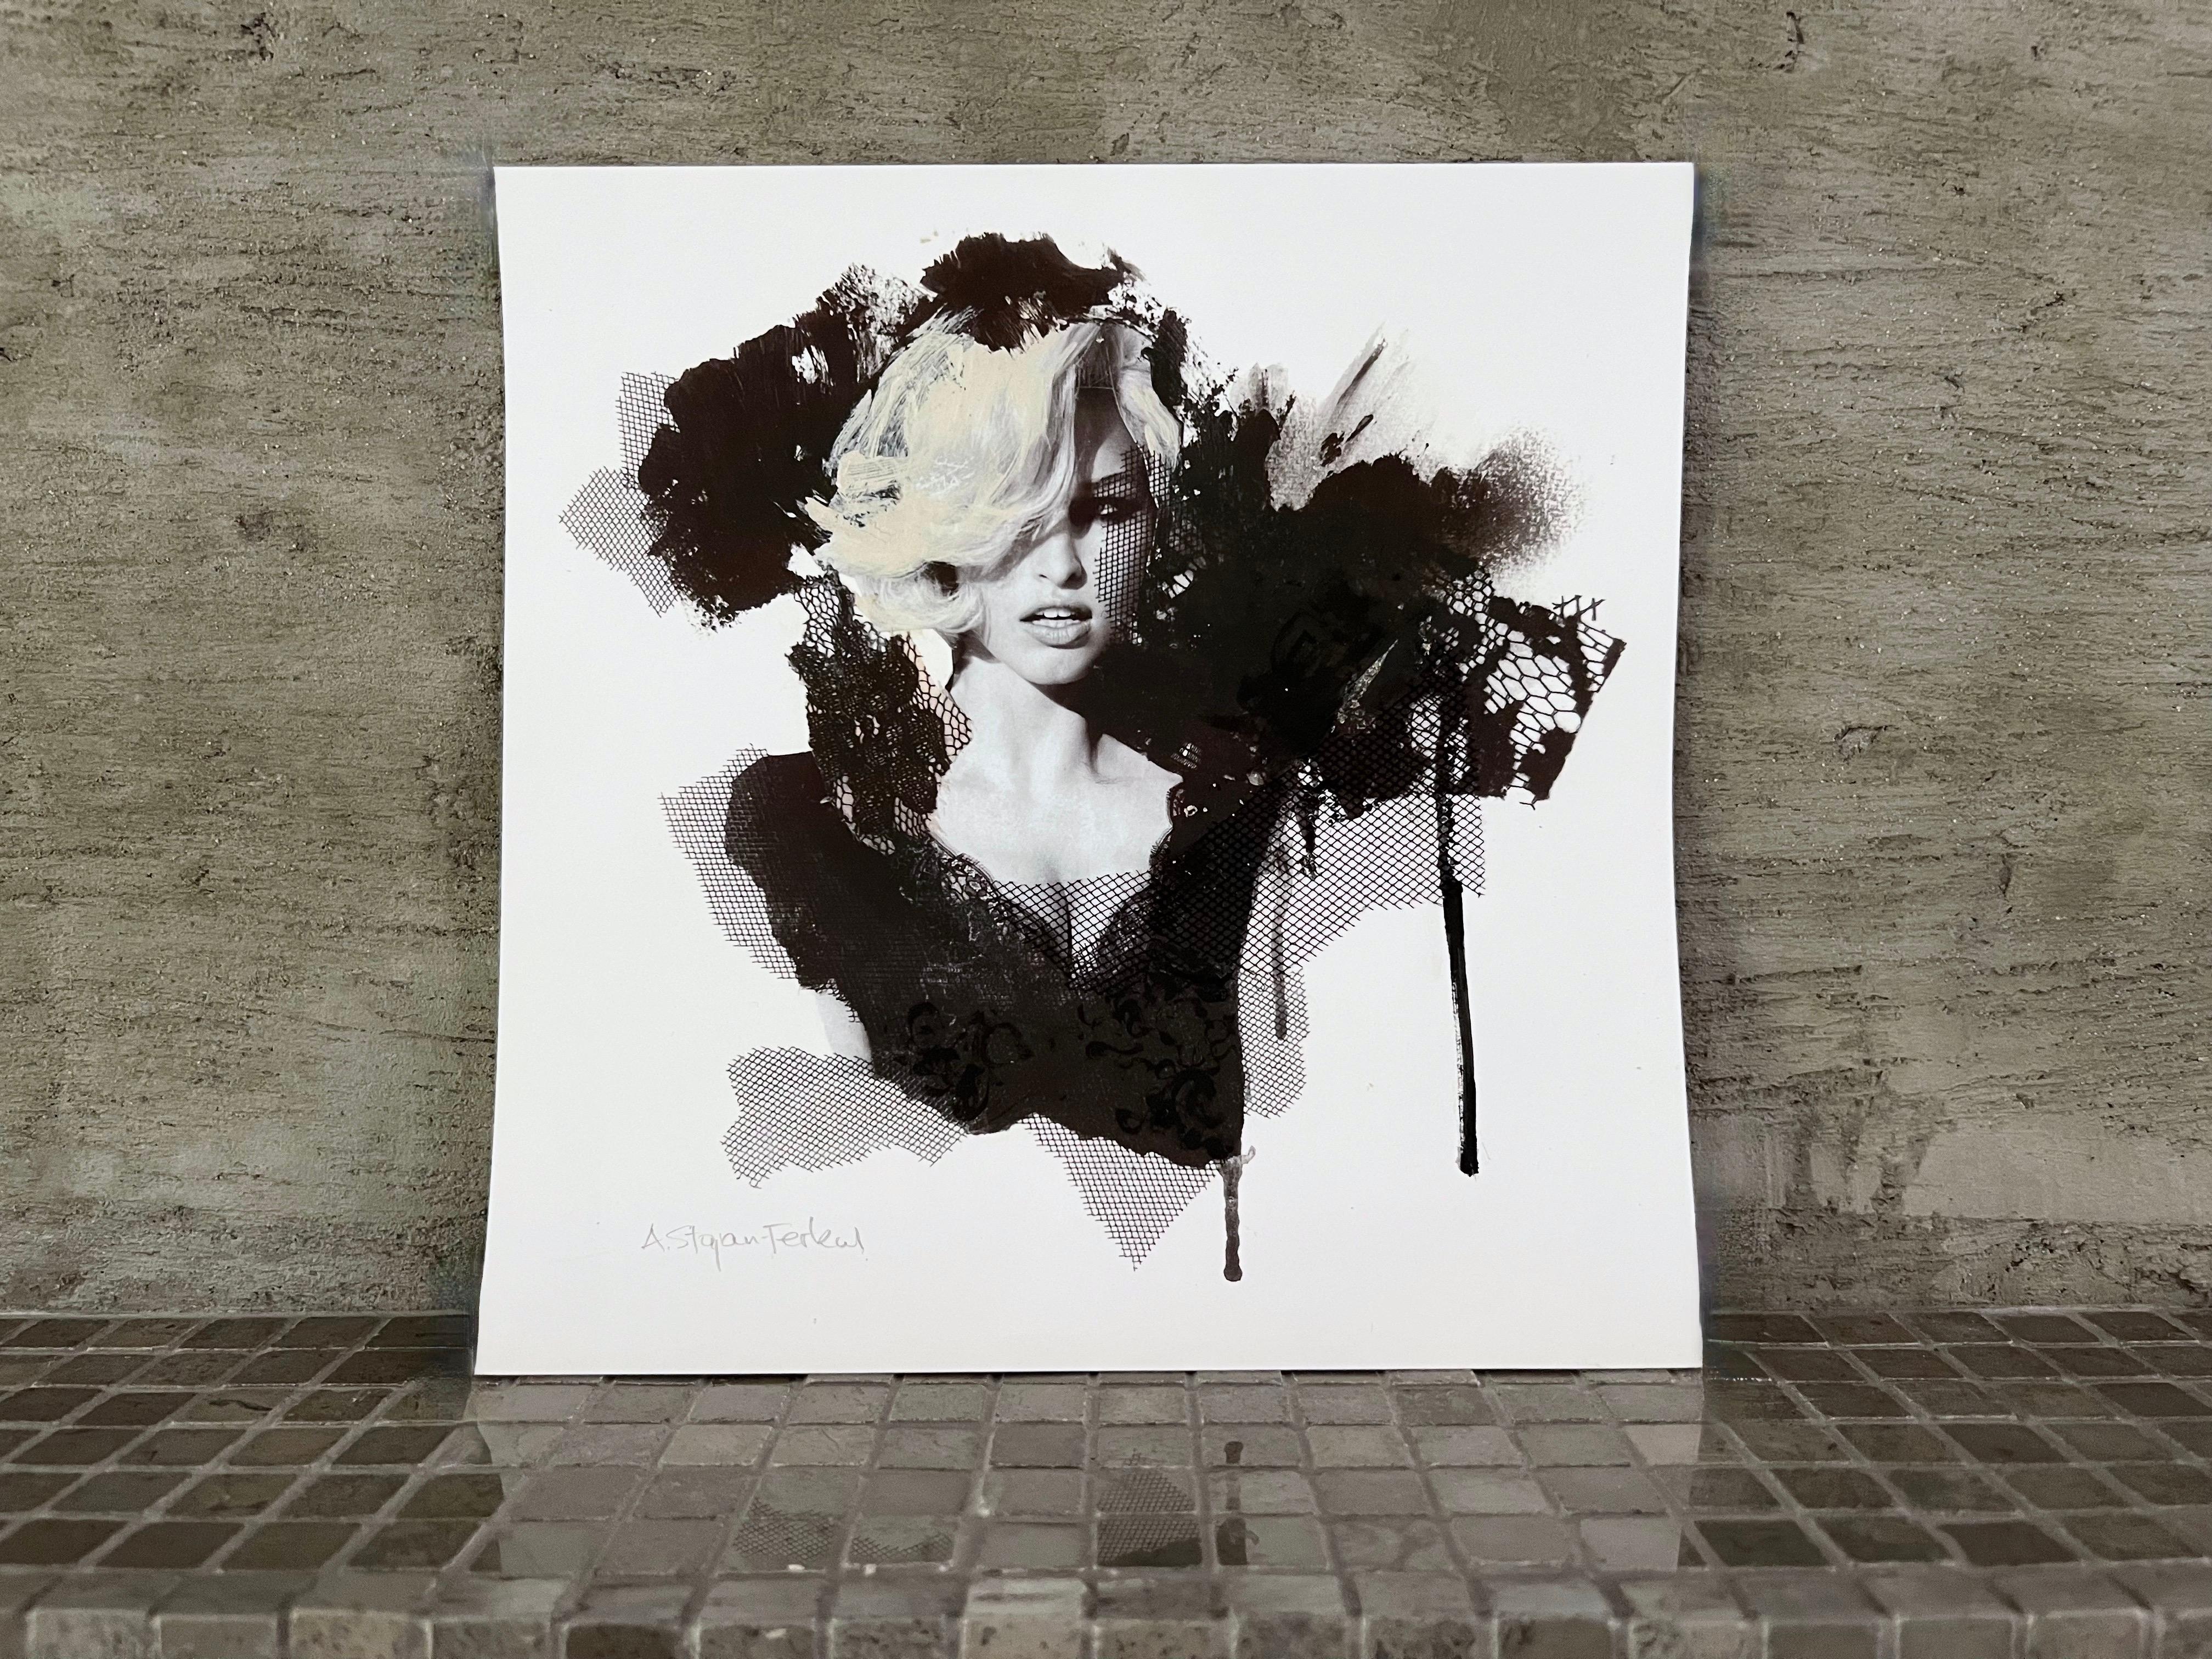 A fusion of digital and hand painted elements give this glamour inspired artwork distinct character and individuality. This one-of-a-kind Giclée print is a high-quality reproduction of an original, collage artwork printed on archival paper. Hand